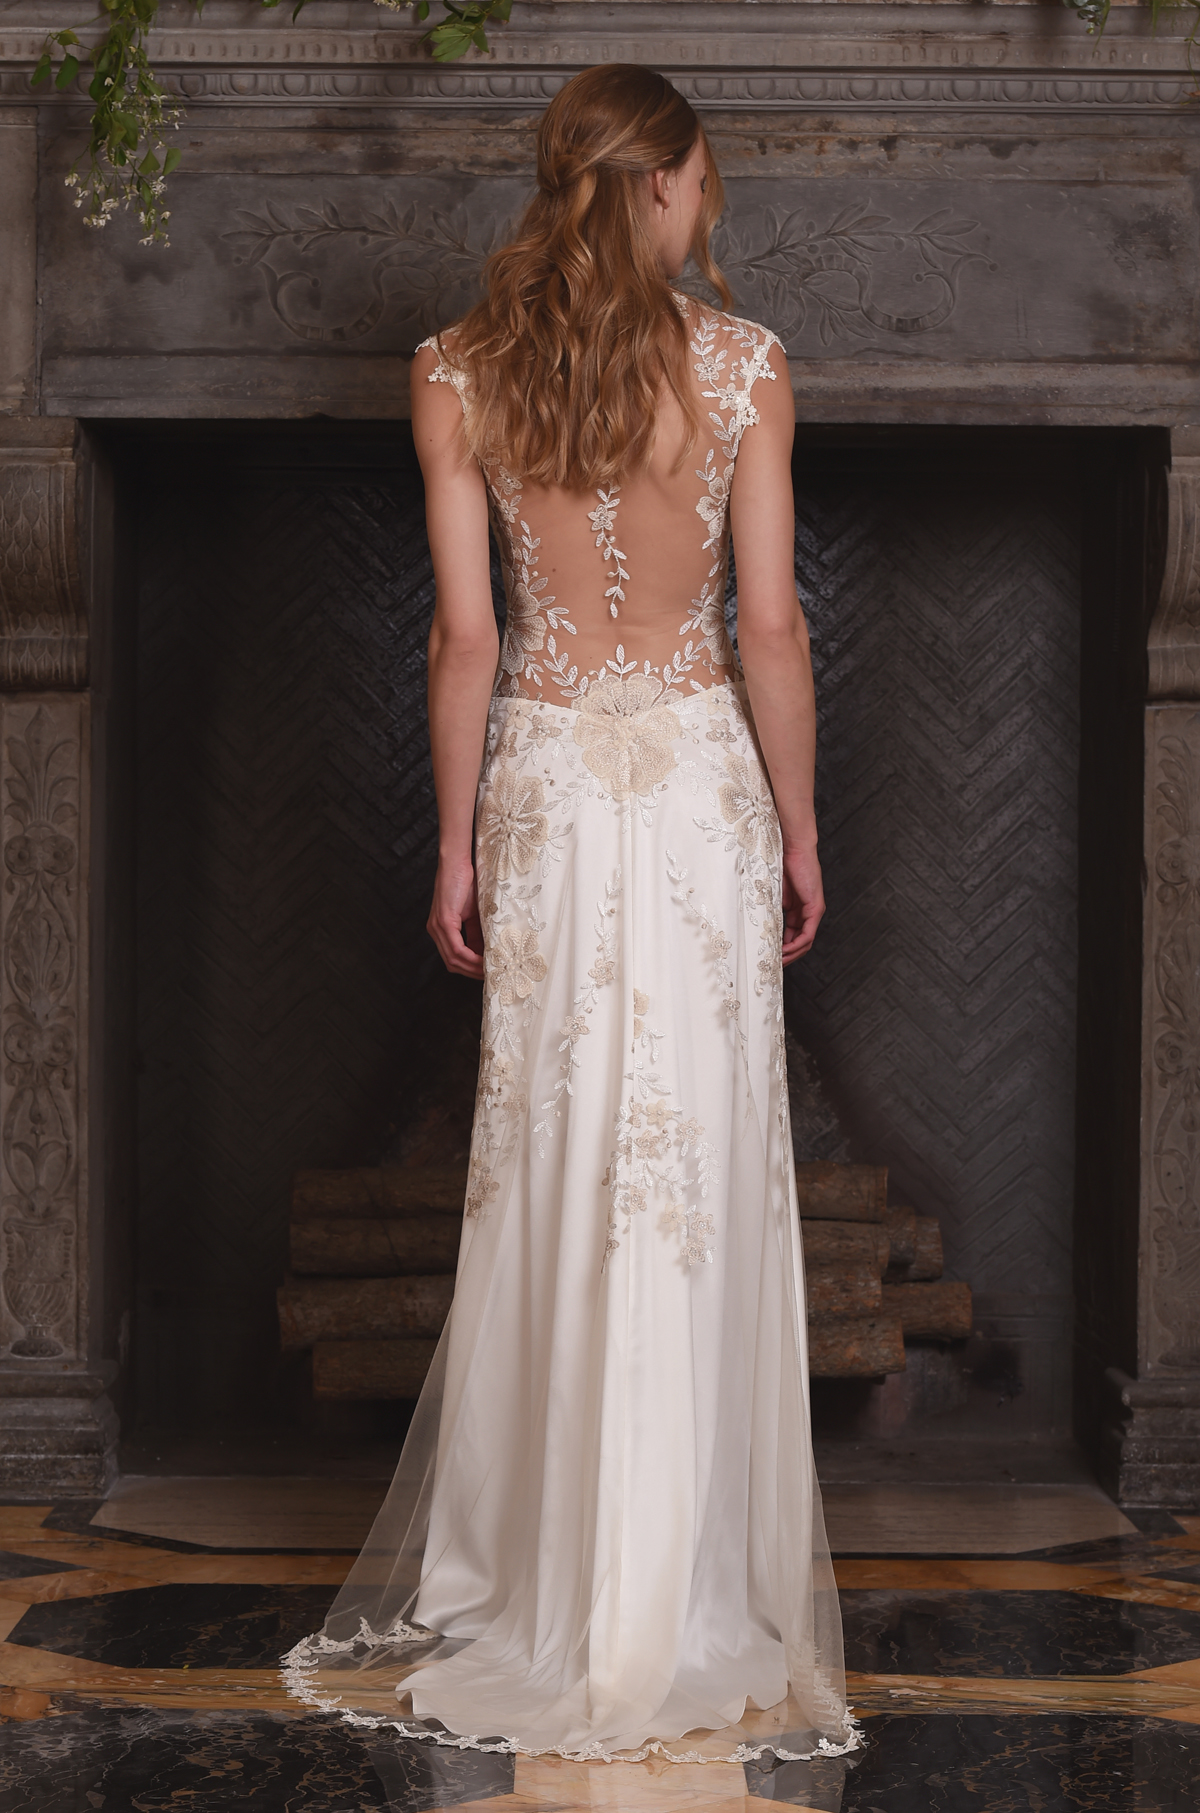 The April gown, from Claire Pettibone's 'The Four Seasons' bridal couture collection for 2017.